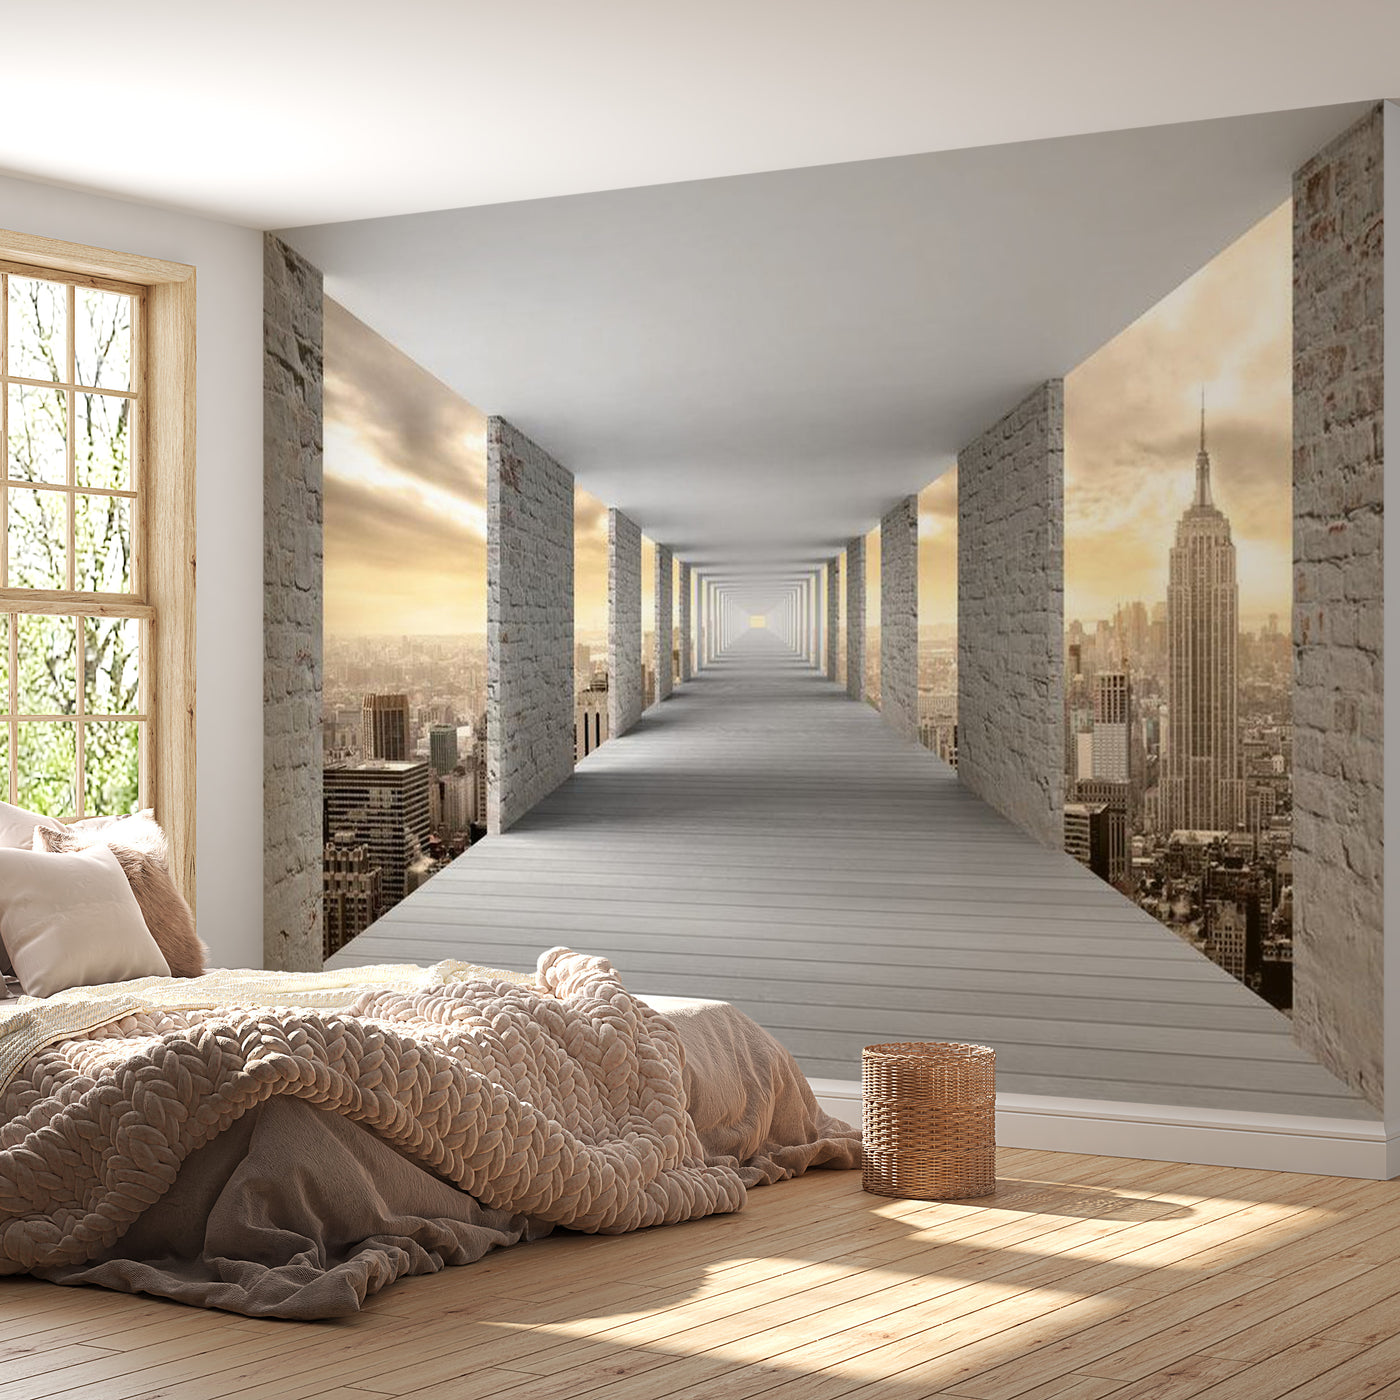 Peel & Stick 3D Illusion Wall Mural - Skyward Corridor - Removable Wall Decals